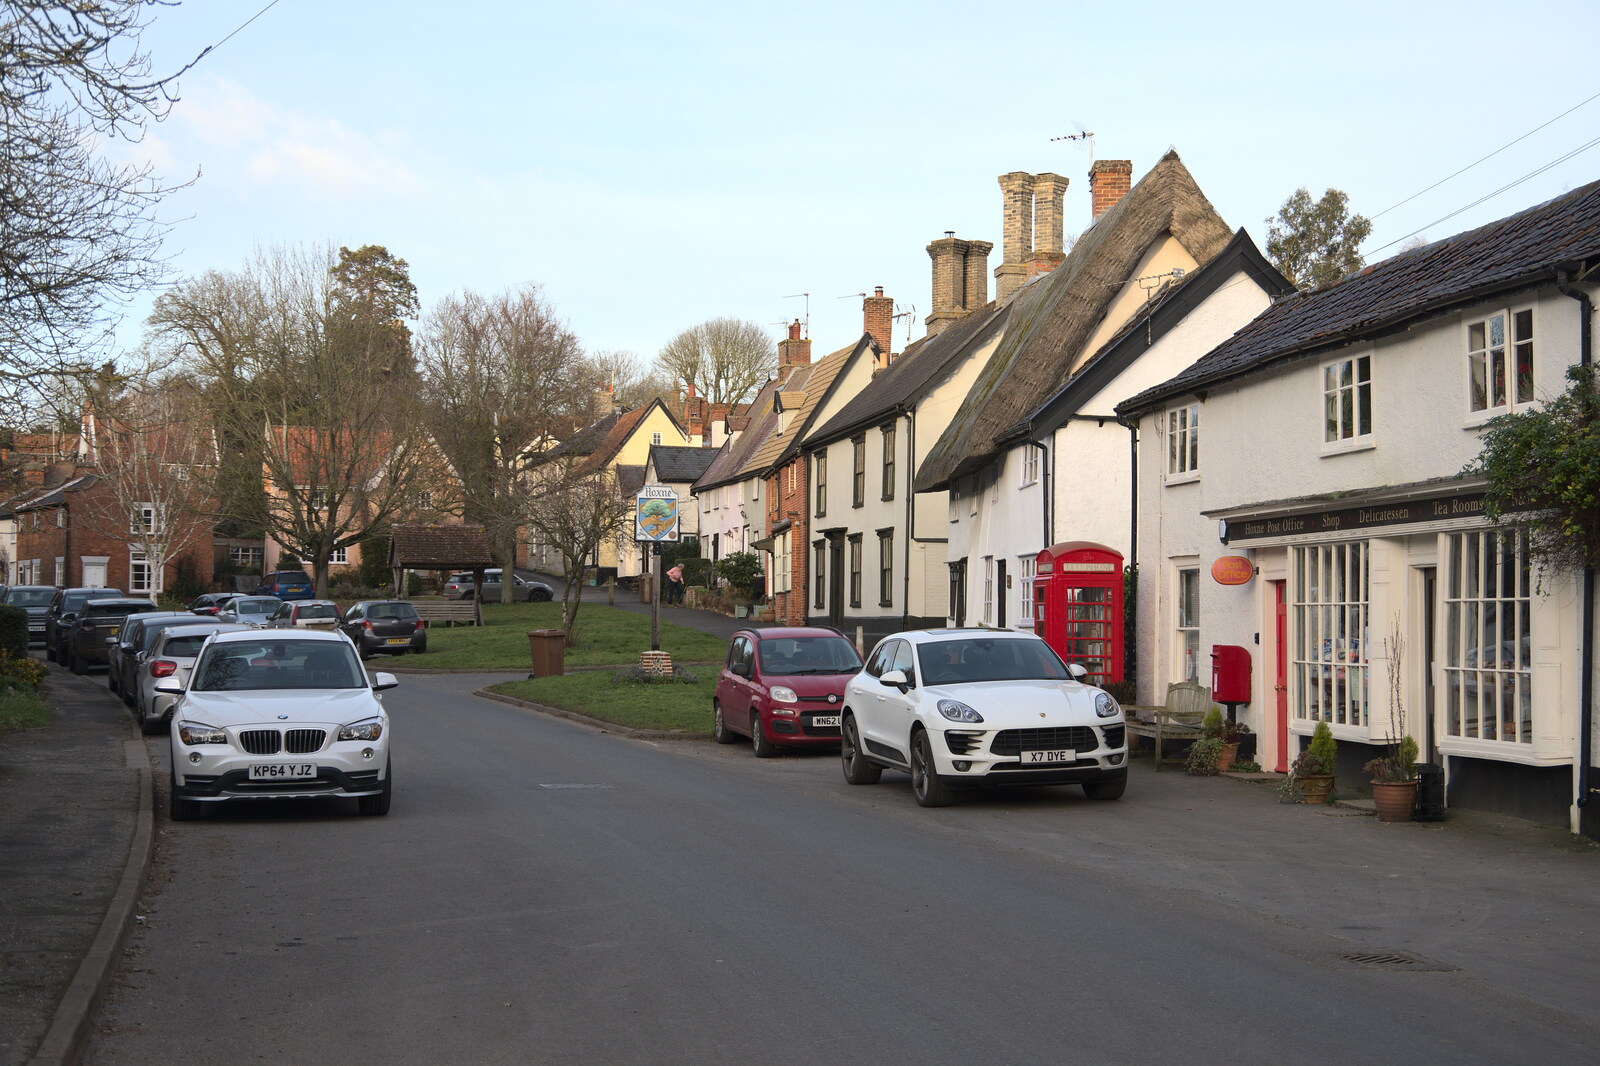 A view of Hoxne from Another Walk to The Swan, Hoxne, Suffolk - 5th February 2023